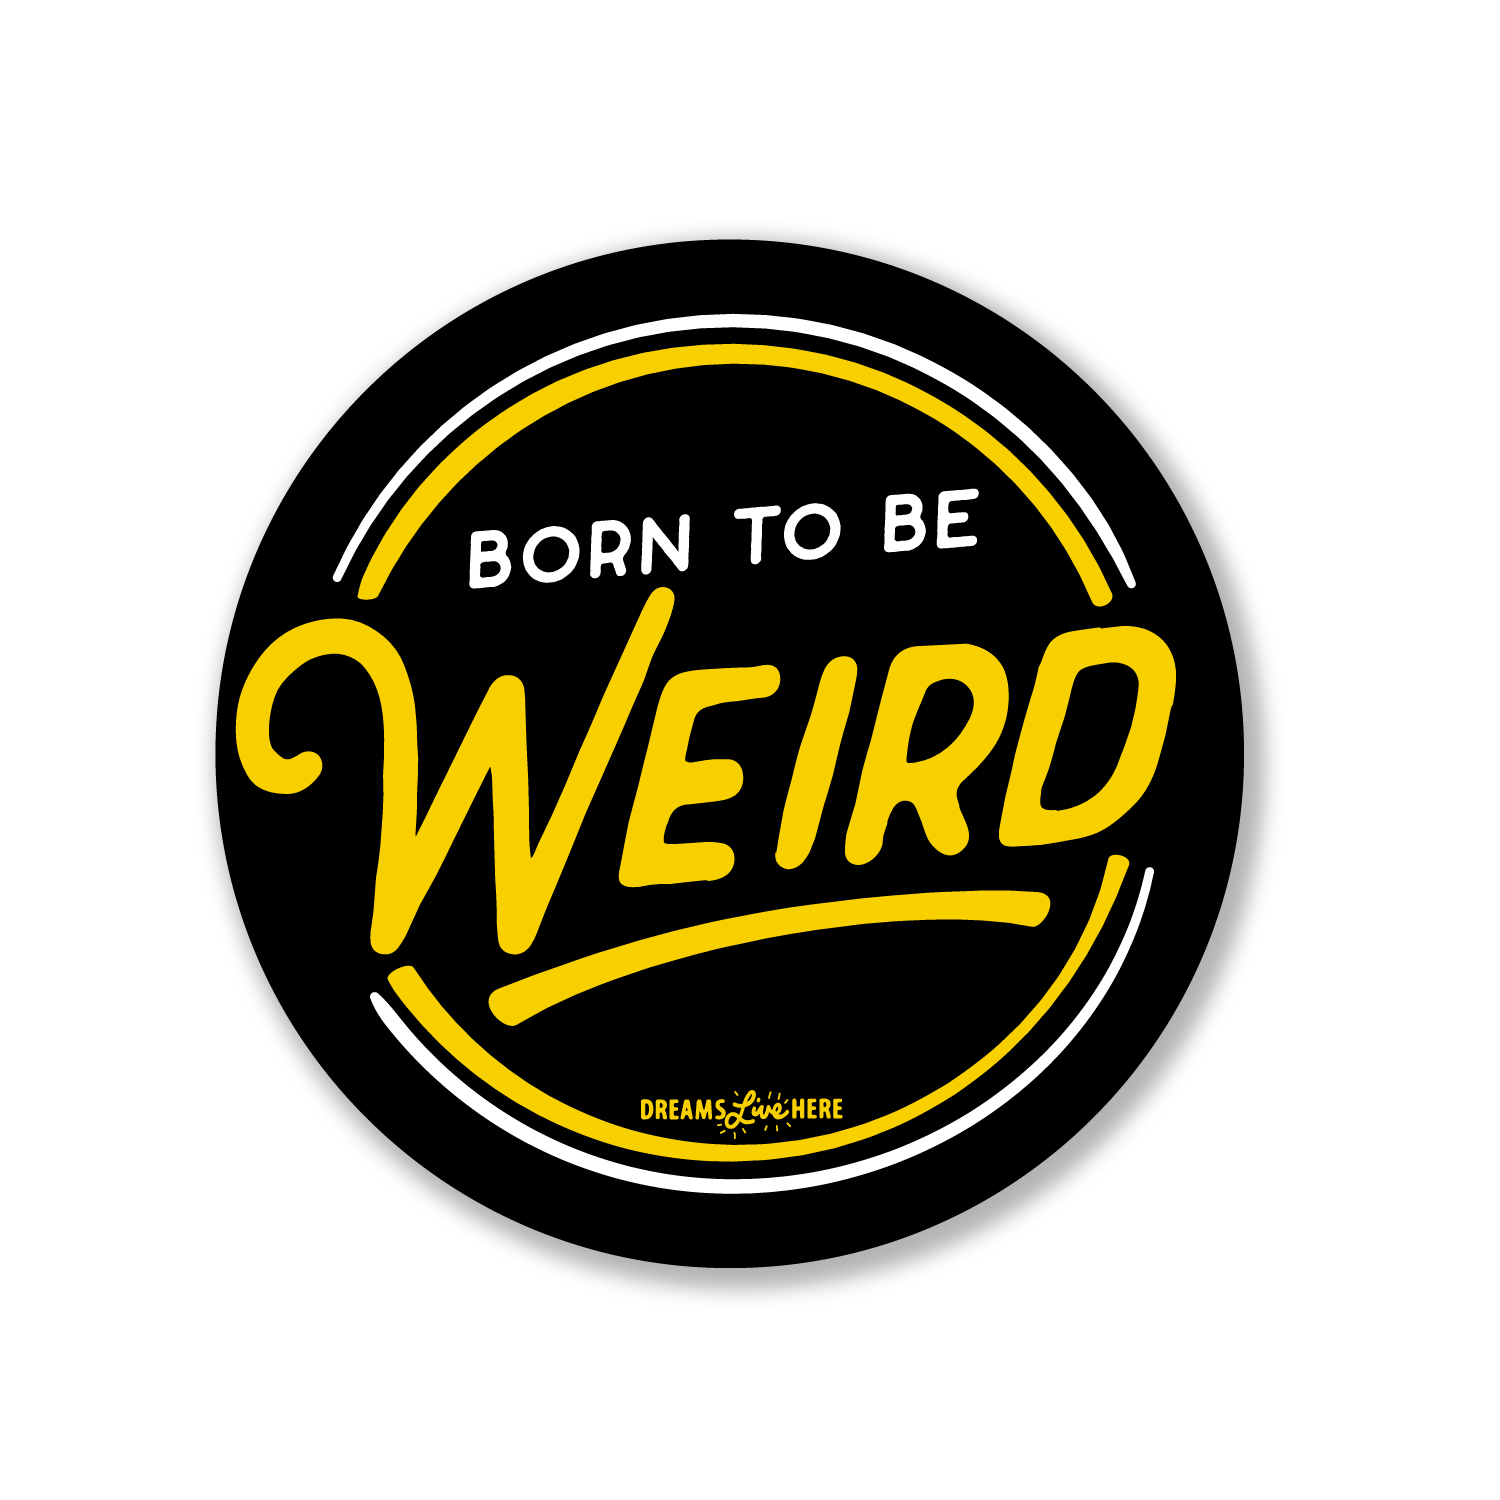 Dreams Live Here Born To Be Weird | Sticker